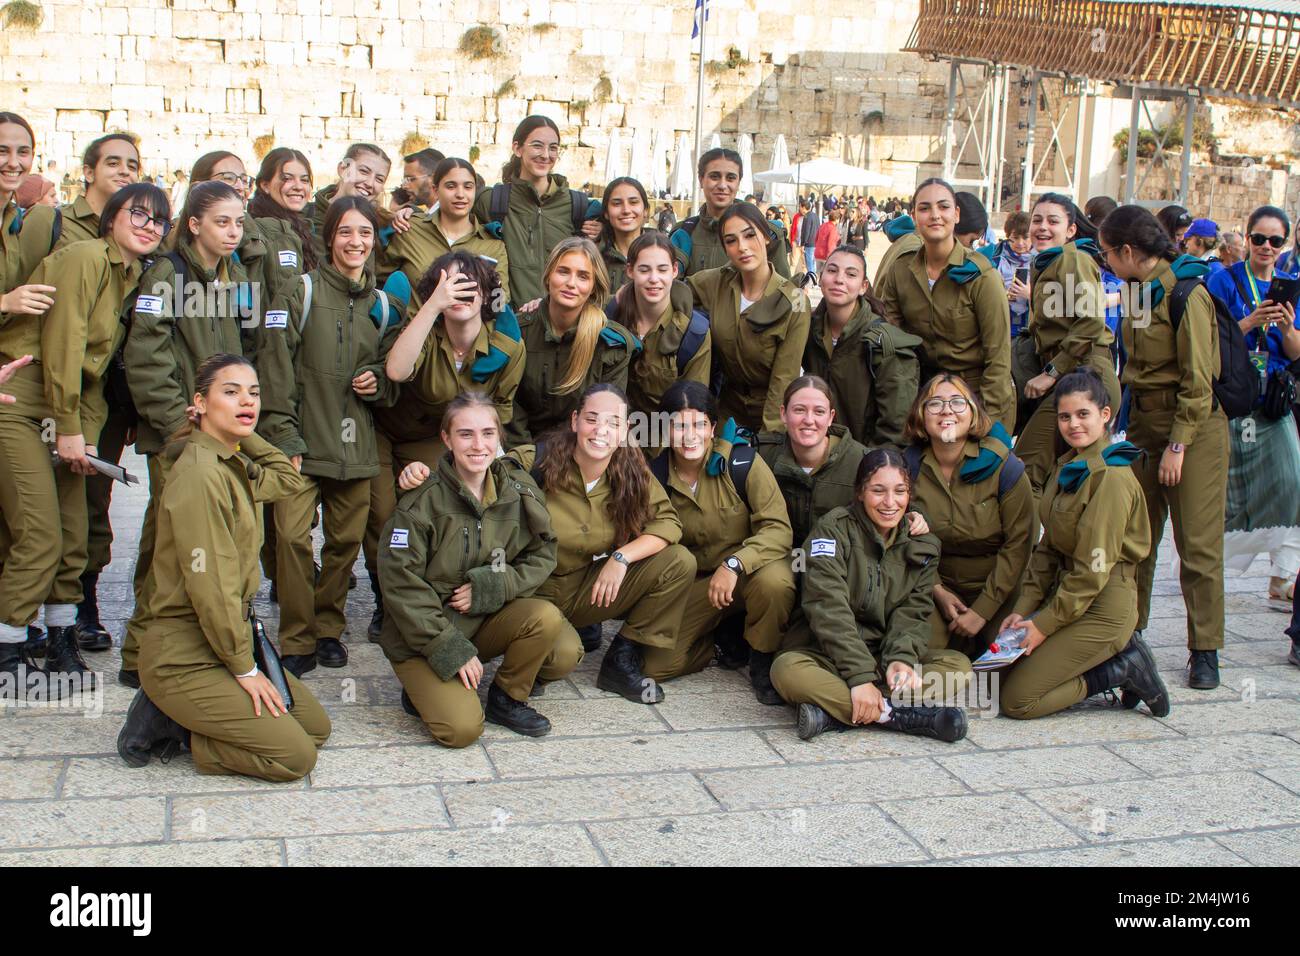 10 Nov 2022 A large group of young female Israeli army conscripts pose for a photograph near the Temple Mount in Jerusalem Israel Stock Photo